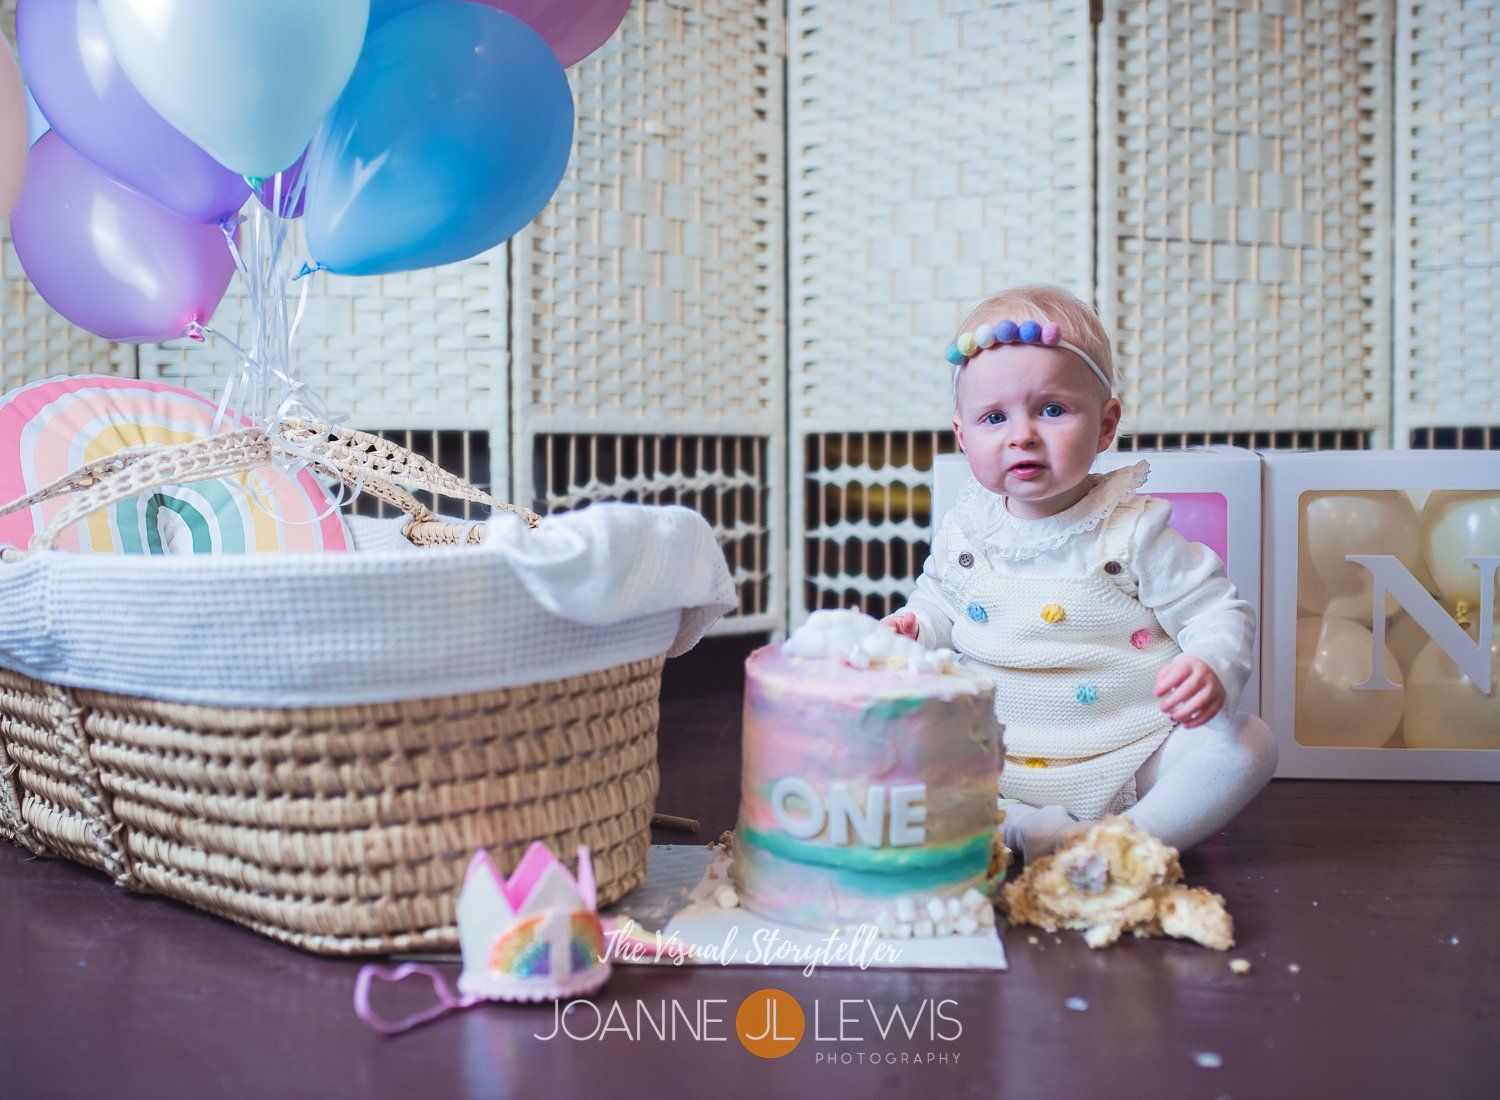 Cake smash photography of first birthday with rainbow theme and balloons in Harlow Essex